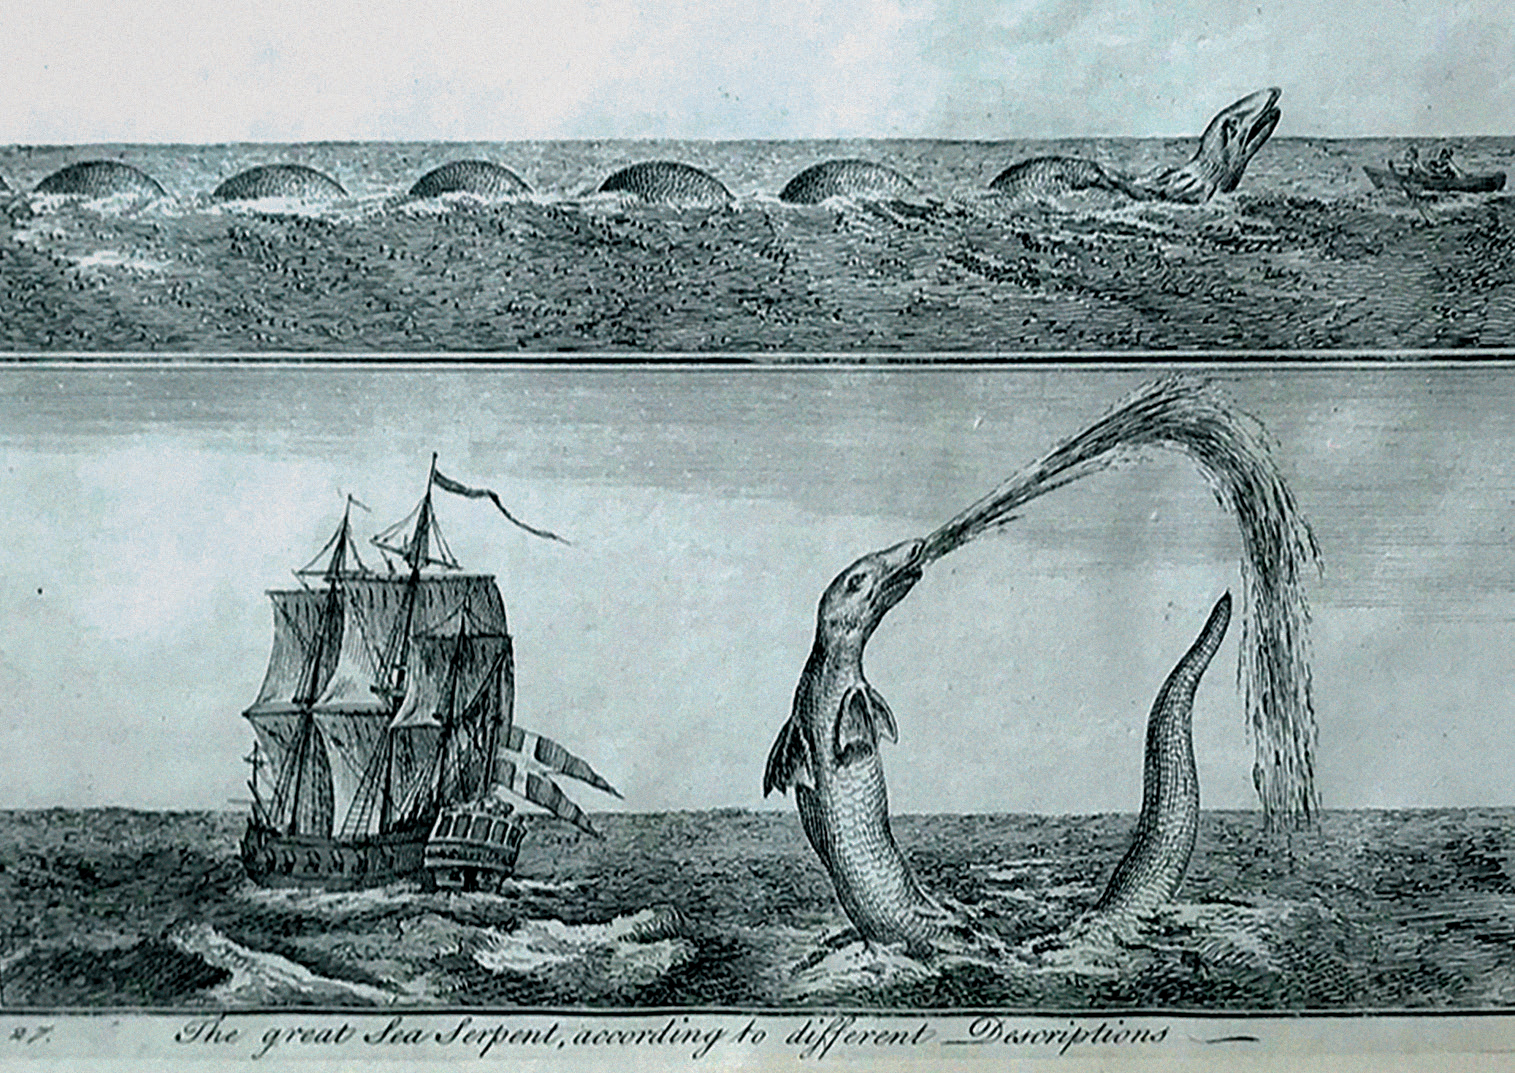 The 'great Sea Serpent’ from the 1755 English edition of Bishop Erik Pontoppidan’s Natural History of Norway